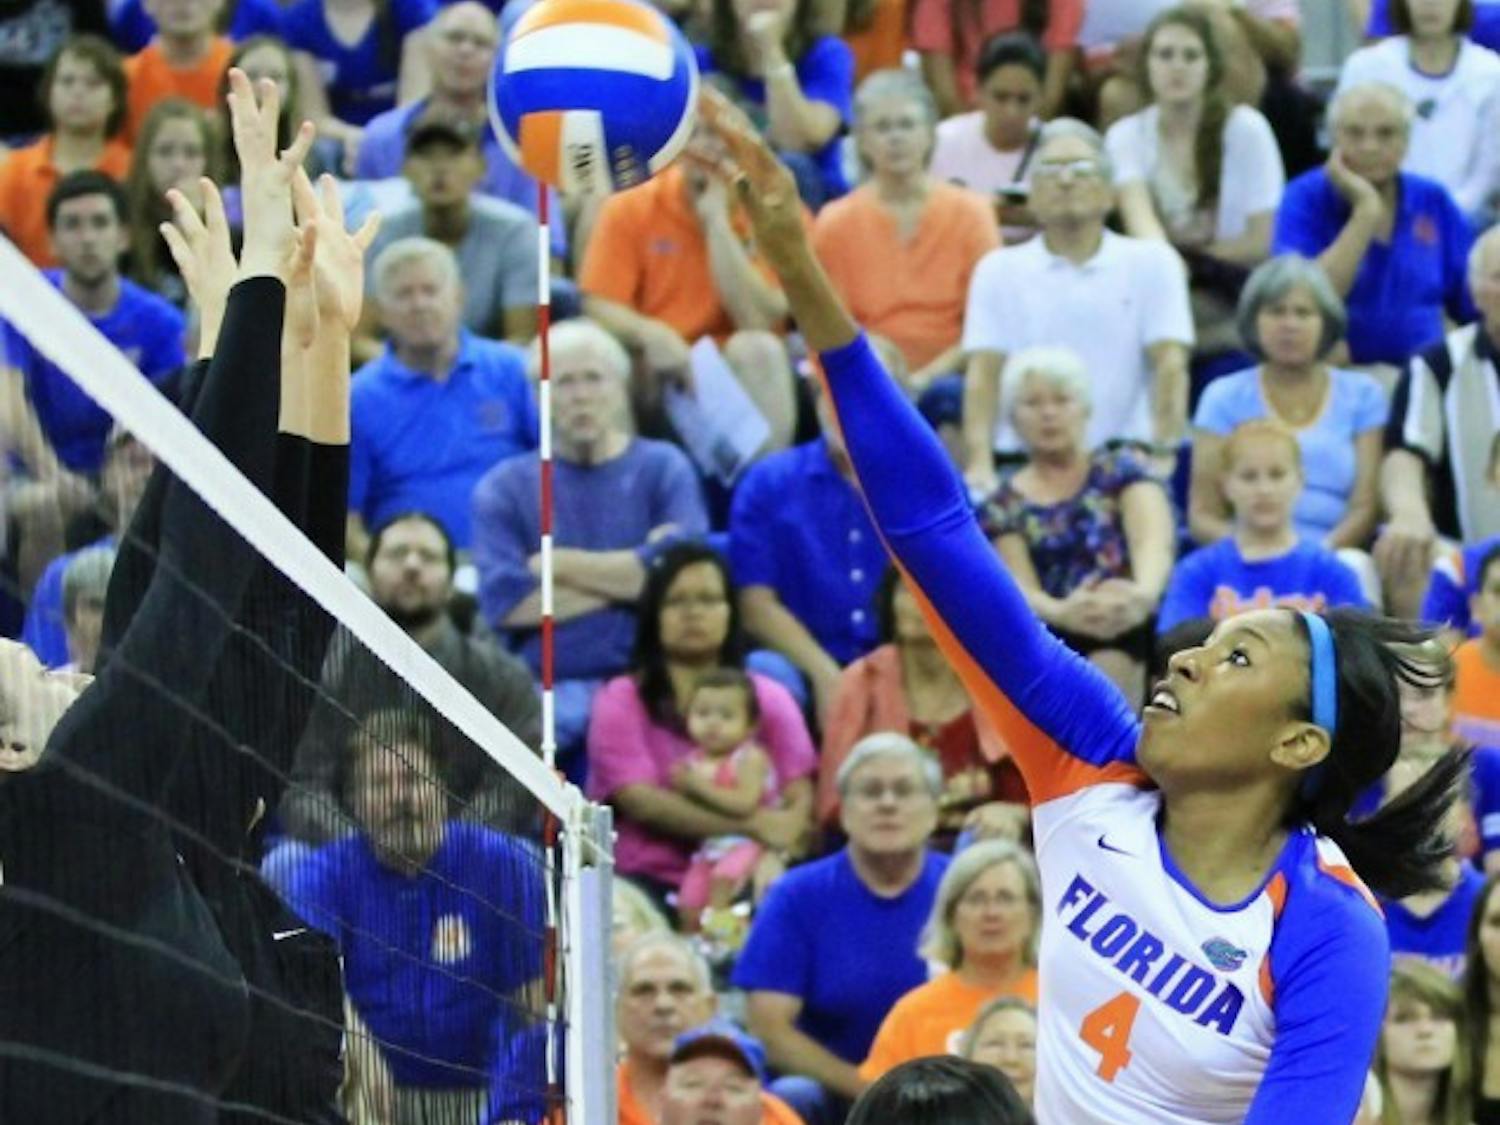 Senior Tangerine Wiggs spikes the ball over the net during a match against Missouri on Friday at Stephen C. O'Connell Center. The Gators defeated the Tigers 3-0.